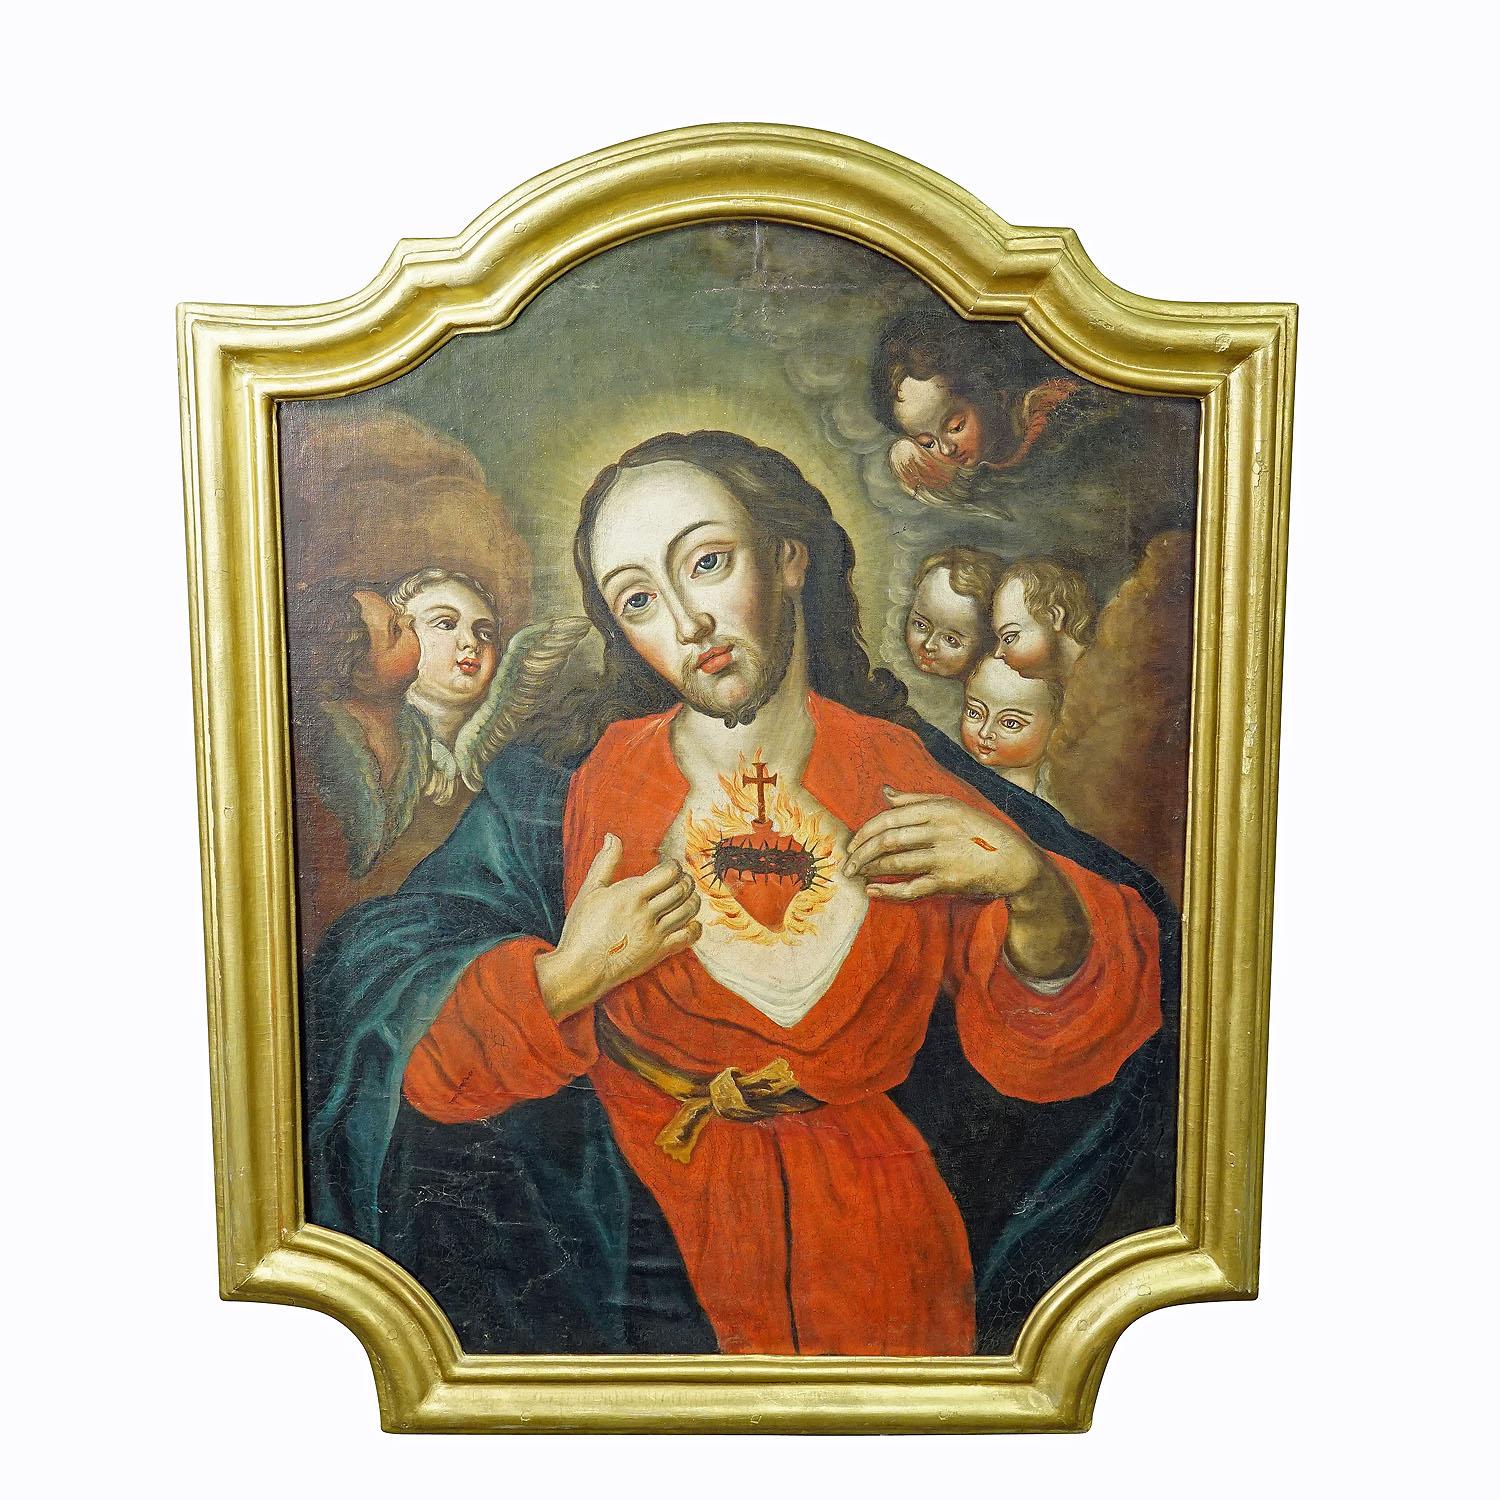 The Sacred Heart of Jesus, Oil Painting on Canvas 18th century

An antique oil painting depicting the sacred heart of Jesus. Oil on canvas with pastell colors. The symbolism of the depiction is that the pierced heart of the crucified is the source